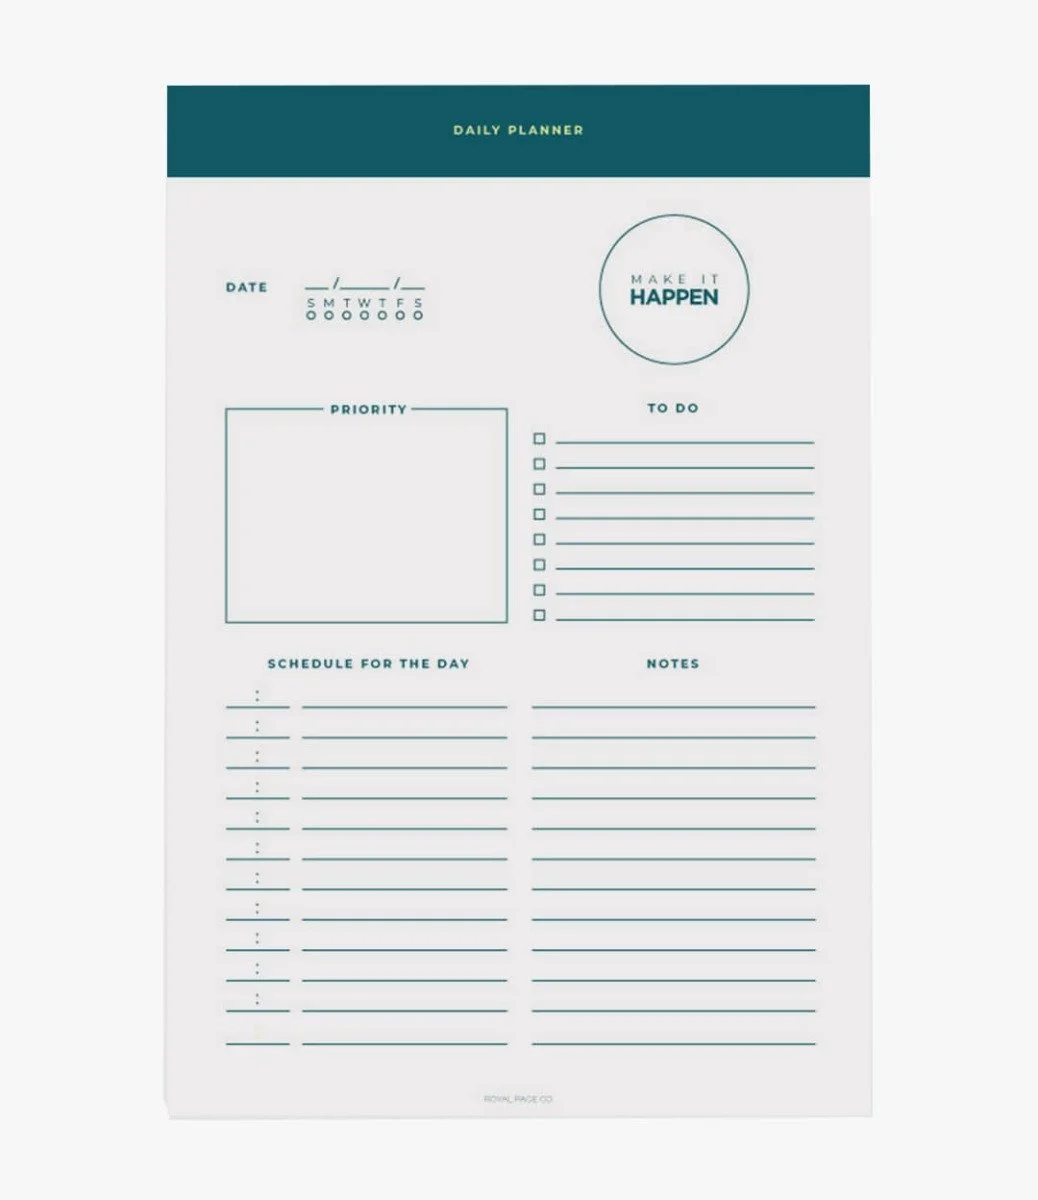 Make It Happen Daily Planner By Royal Page Co